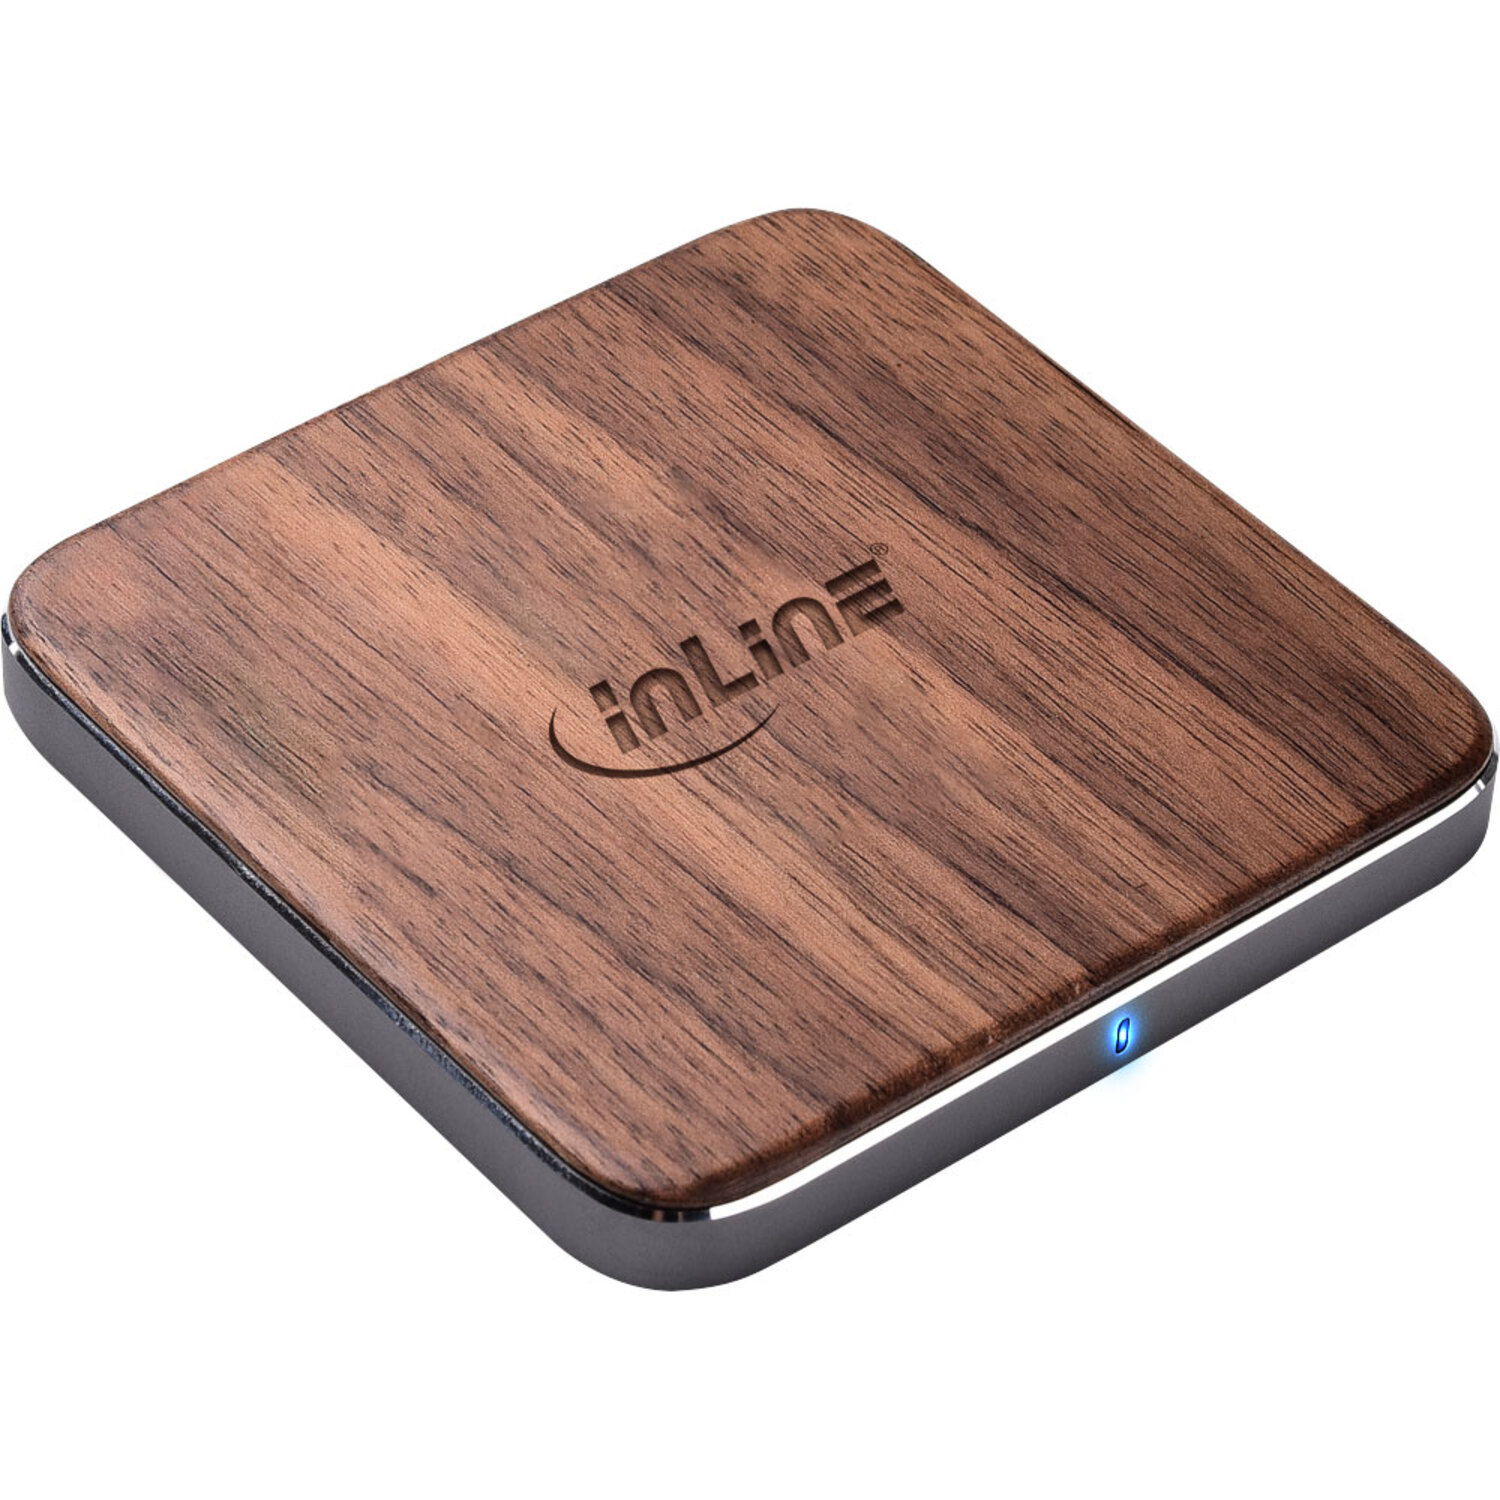 / woodcharge, walnuss Smartphone wireless InLine® charger, / Qi Qi Ladegeräte fast kabellos InLine, INLINE